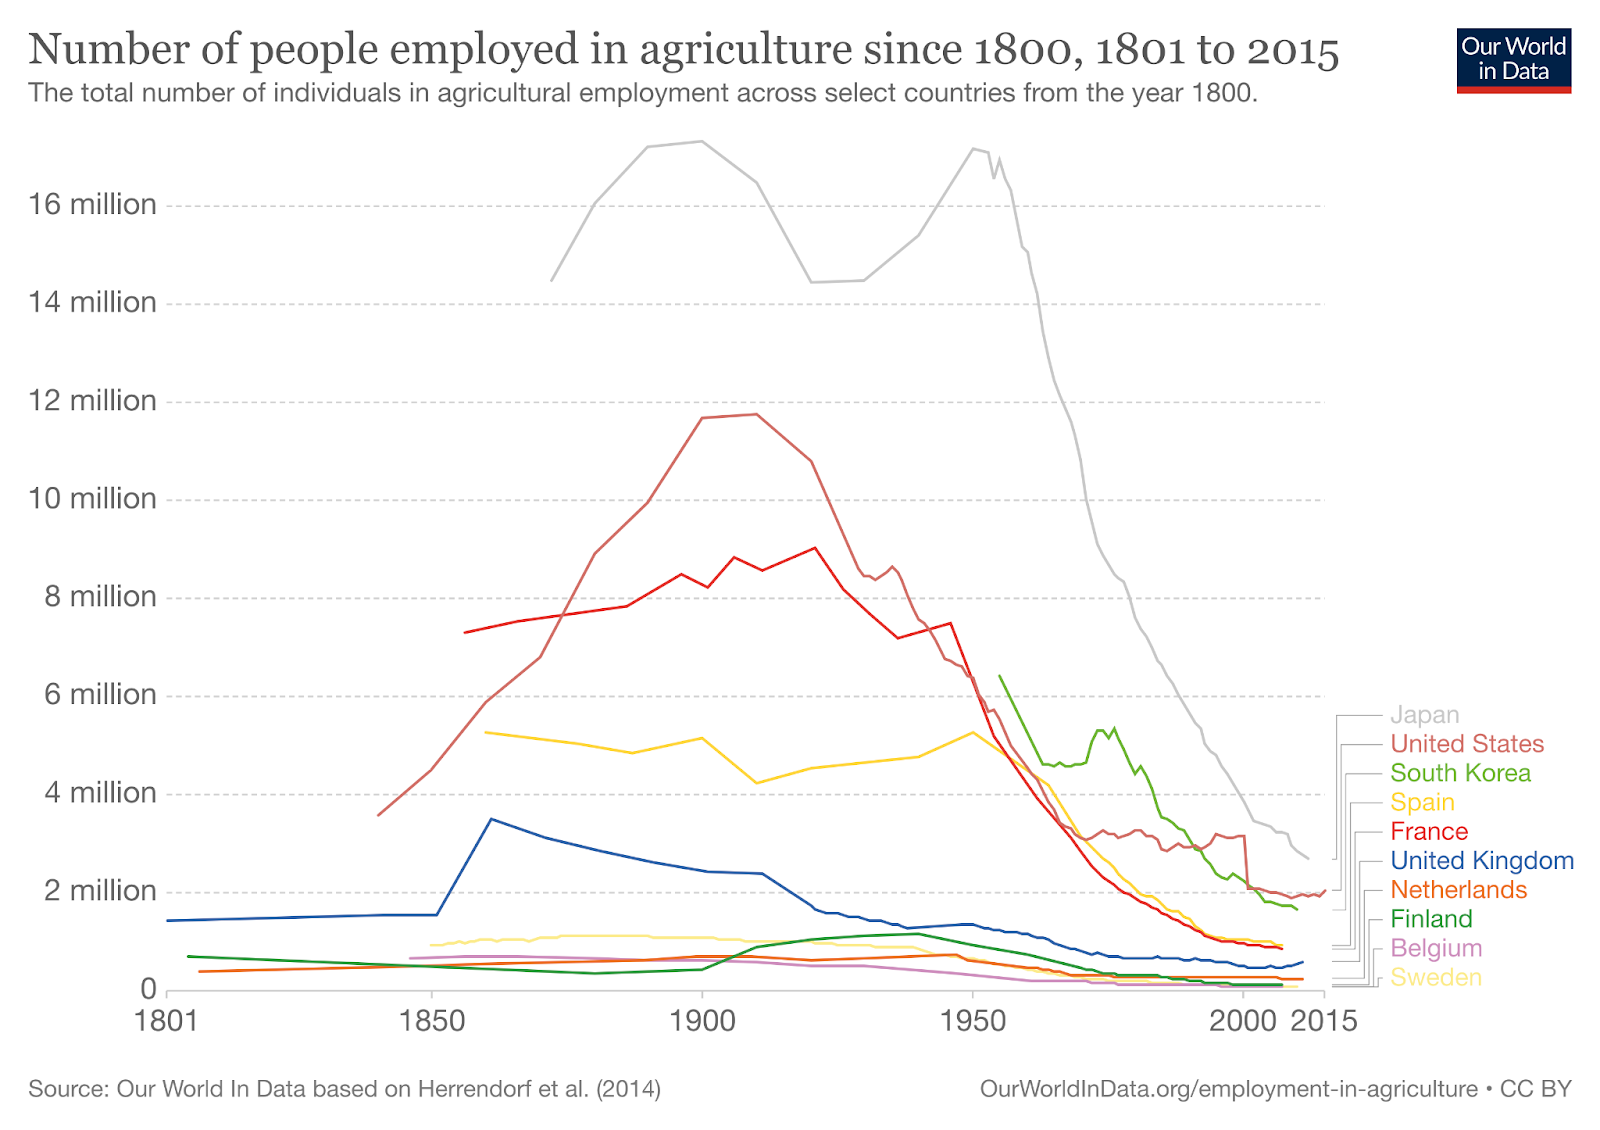 Graph of the change in number of people employed in agriculture from 1801 to 2015